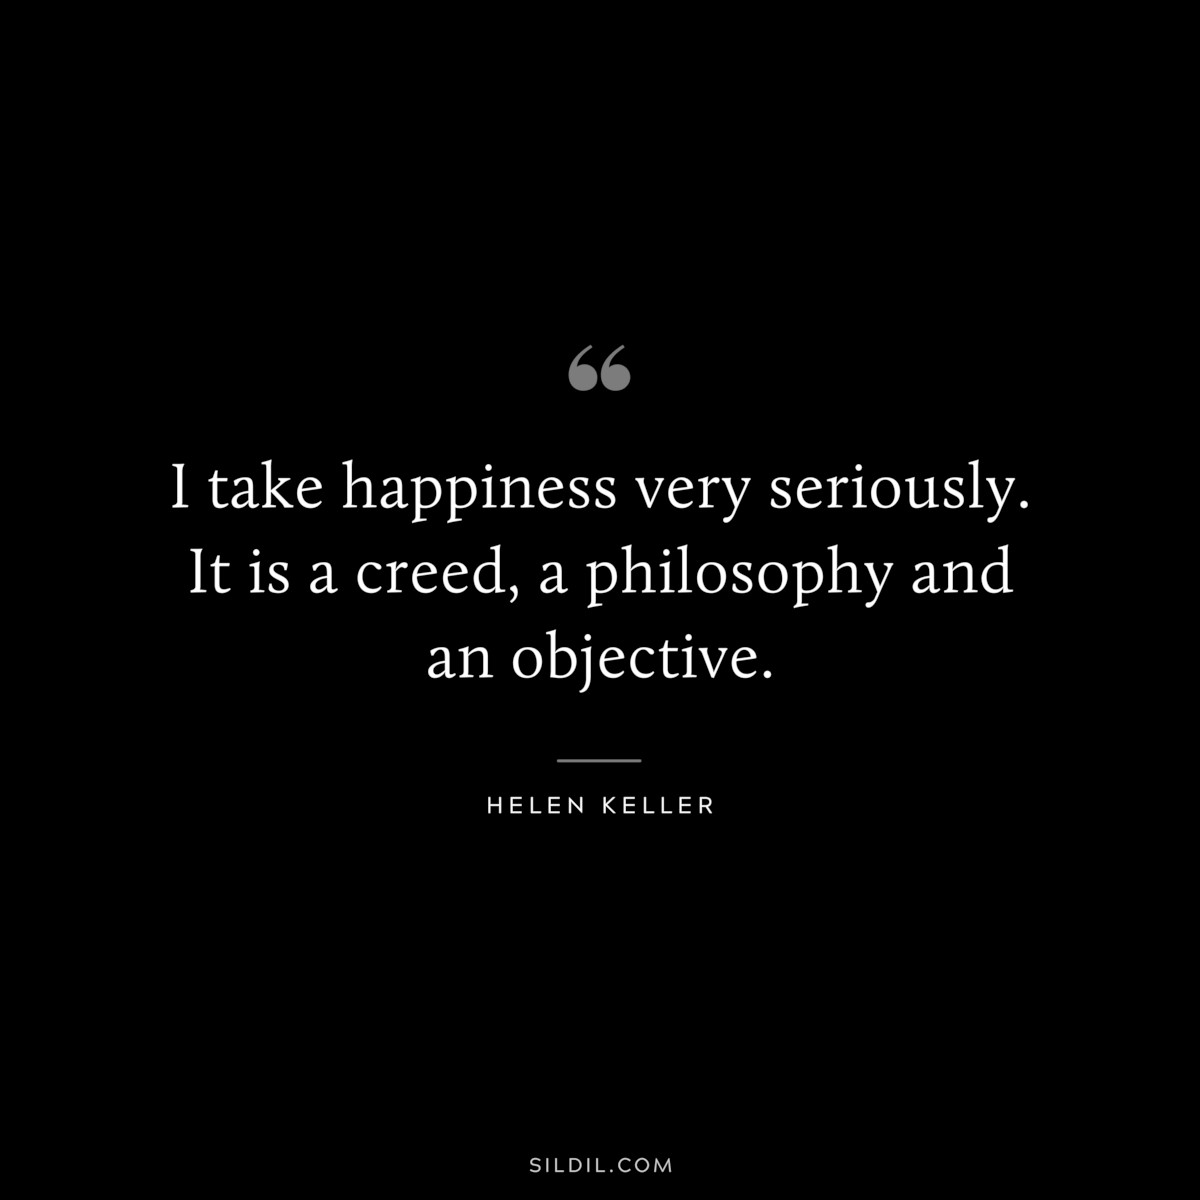 I take happiness very seriously. It is a creed, a philosophy and an objective. ― Helen Keller